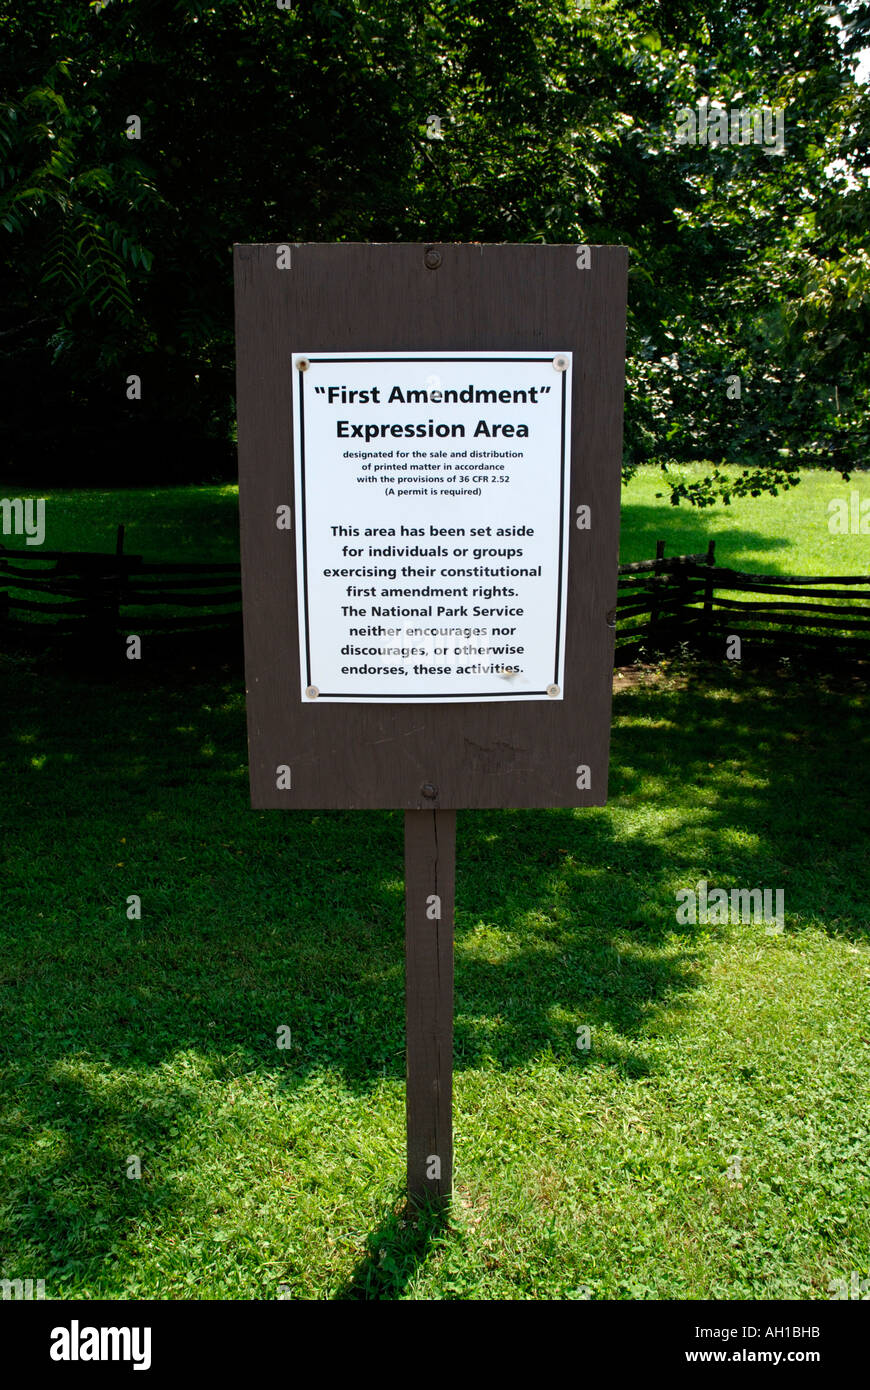 First amendment expression area sign, Great Smoky Mountain National Park Stock Photo